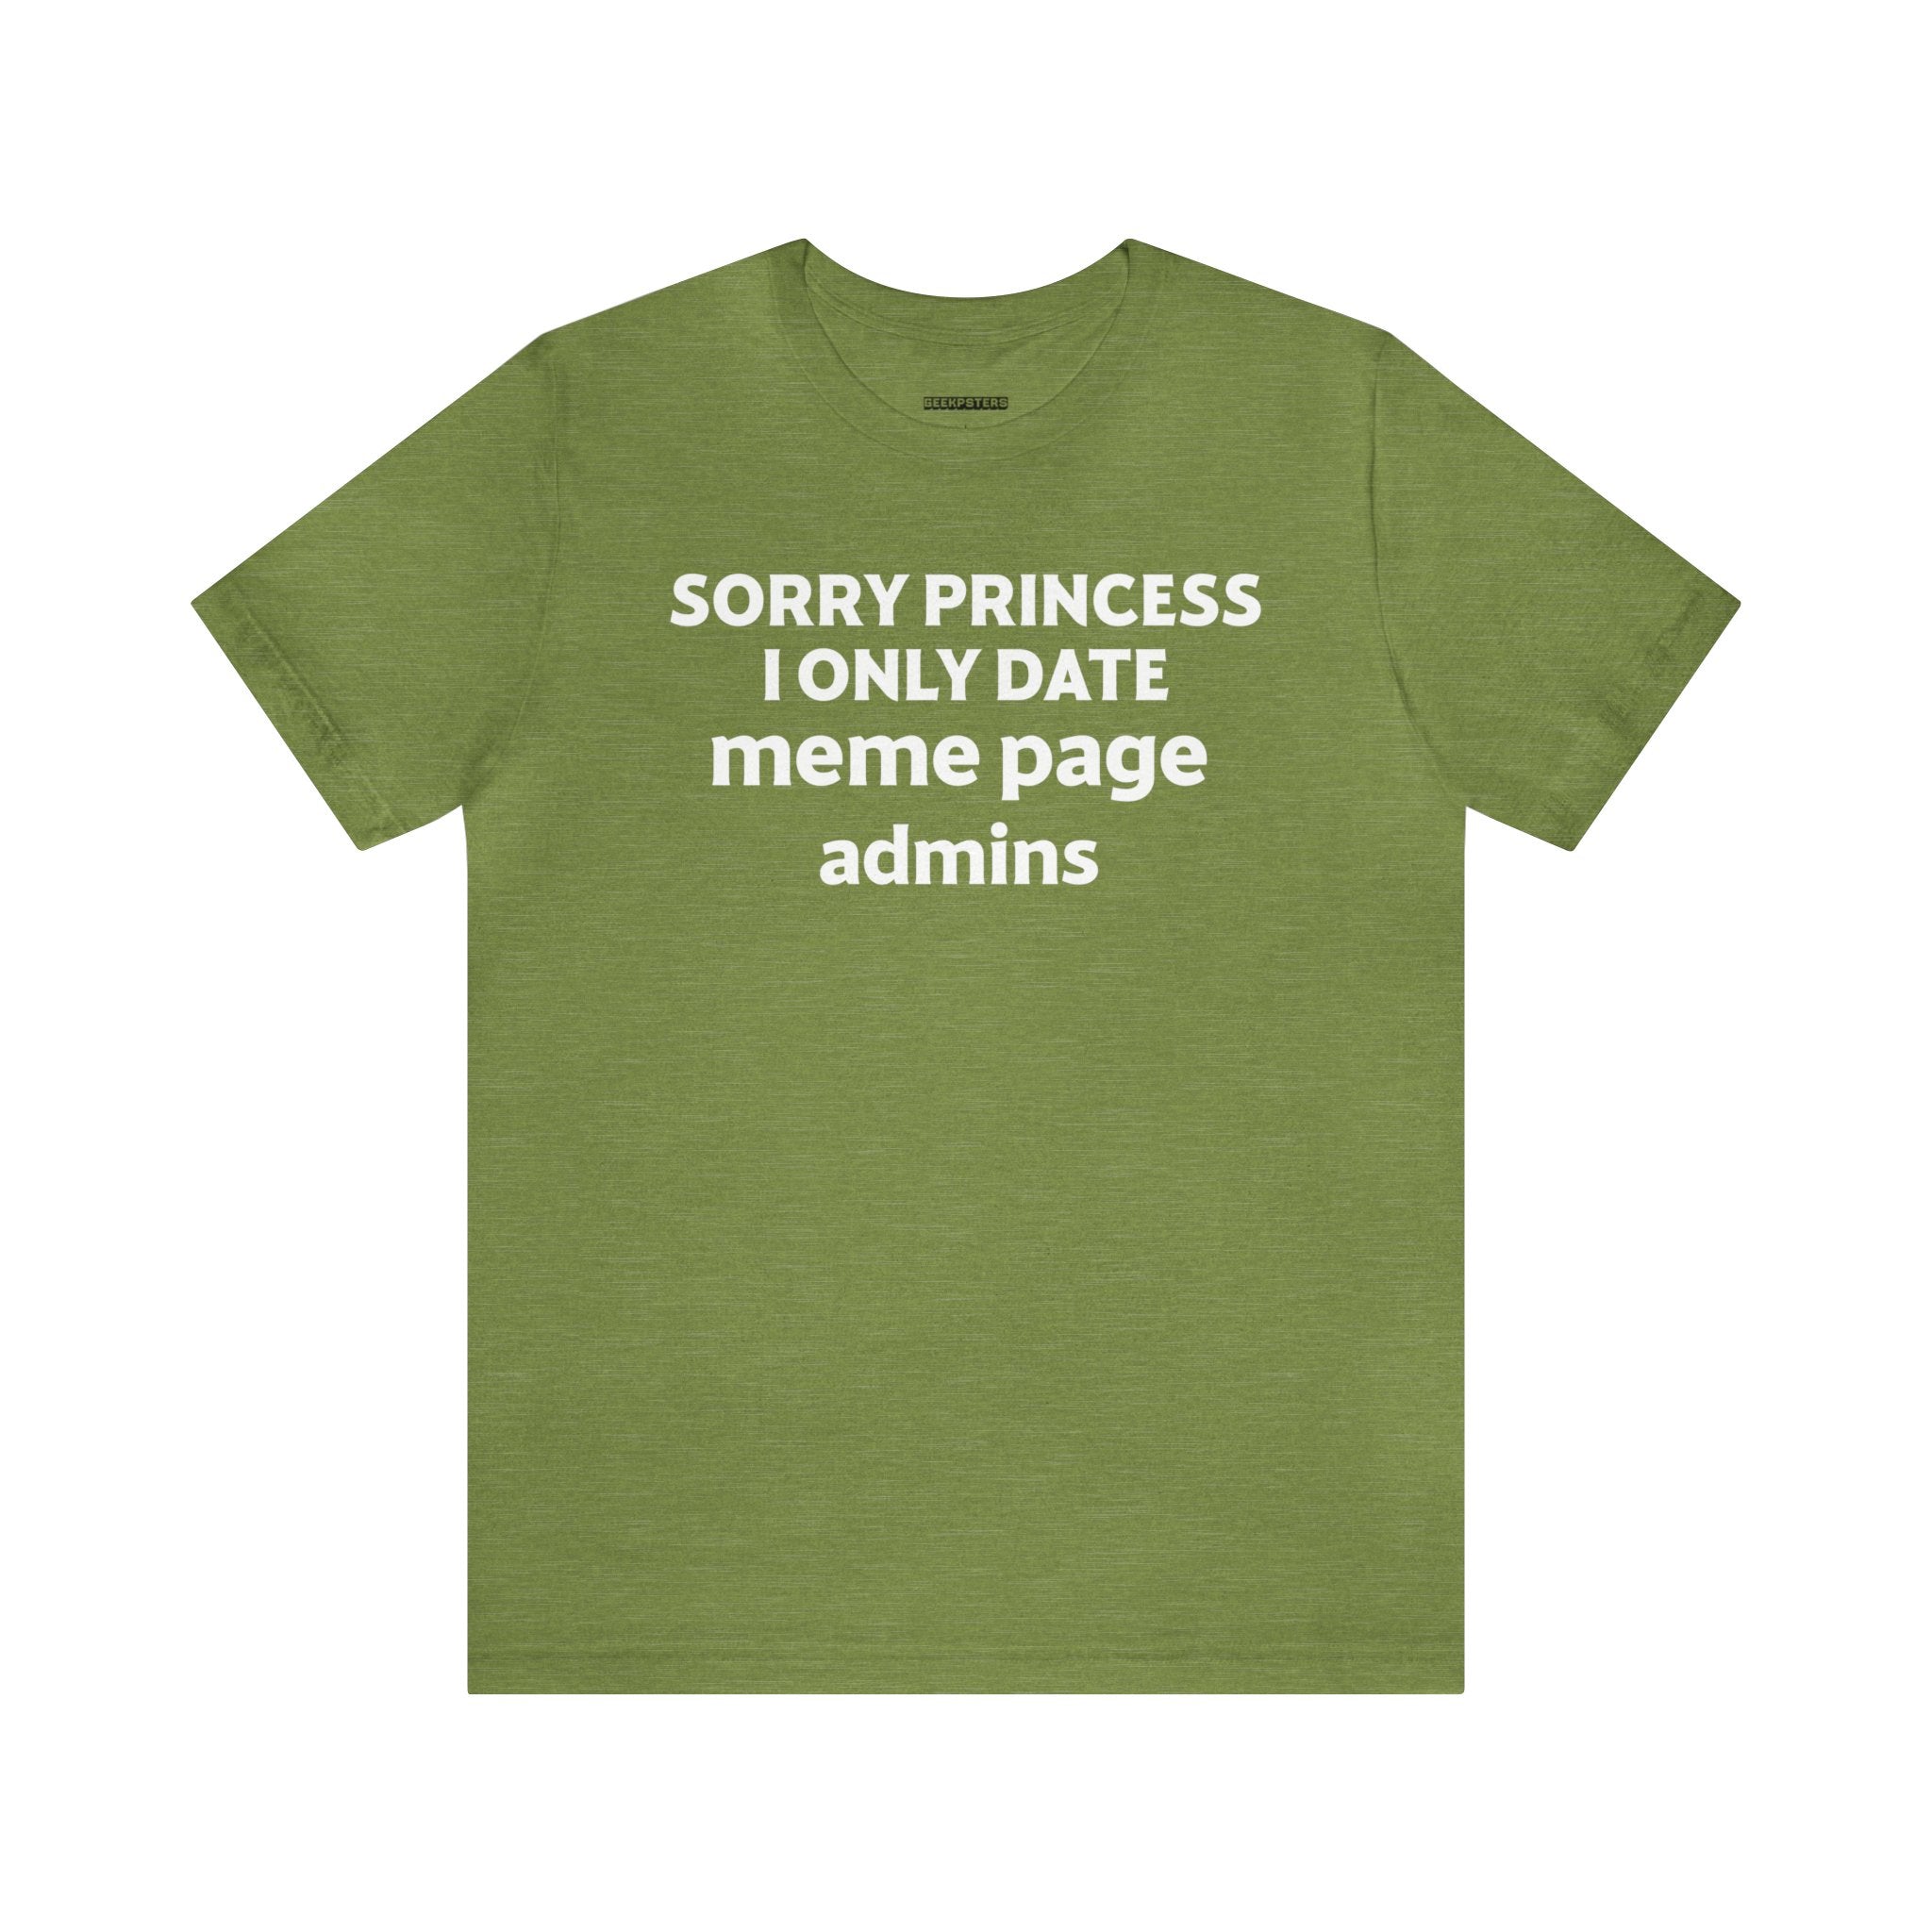 Today, you can order a Sorry Princess T-Shirt that says "sorry princess, I only date meme page admins.